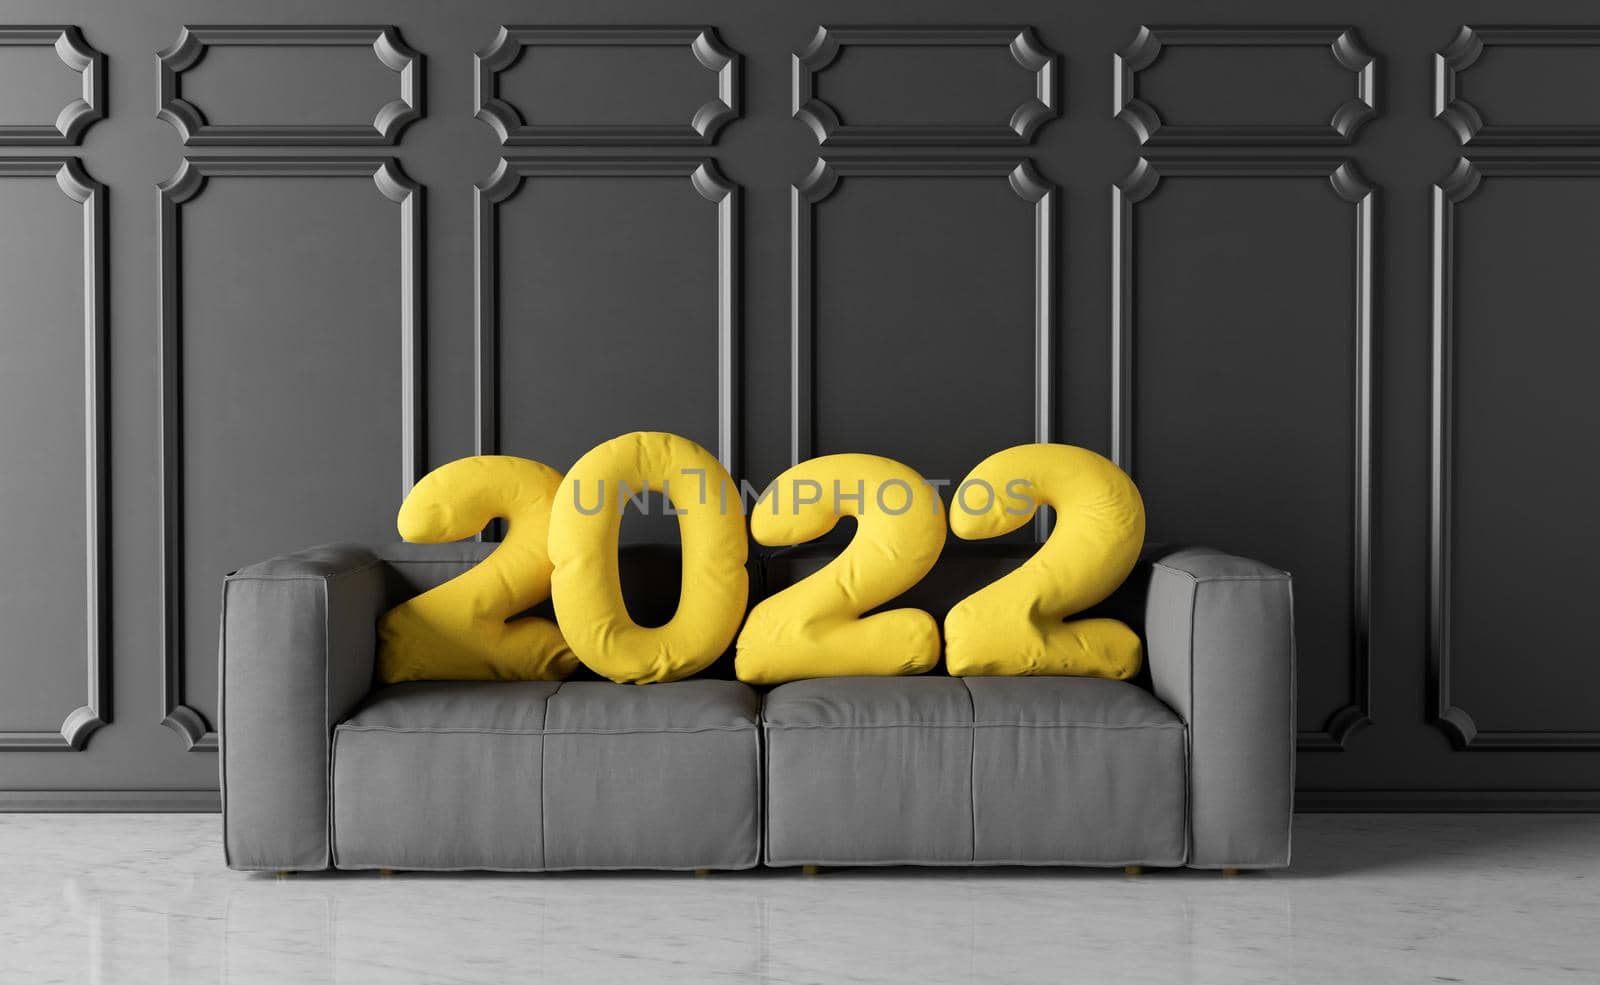 gray sofa with yellow cushions in the shape of the number 2022. new year concept at home and comfort. 3d rendering